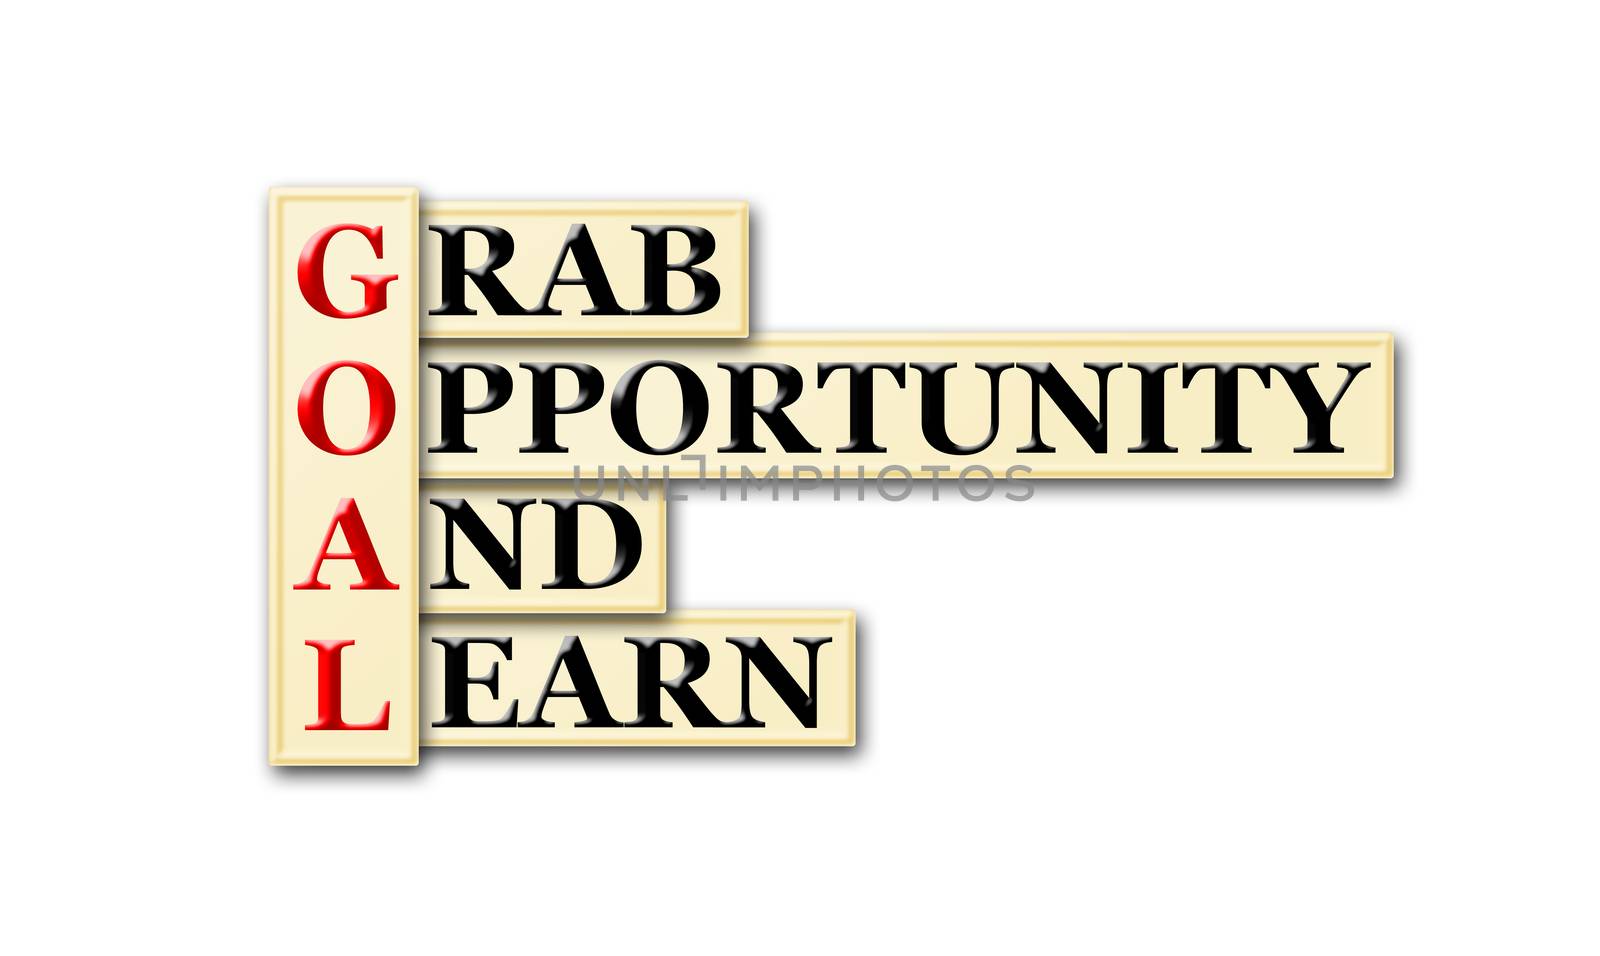 Acronym concept of Goal  and other releated words